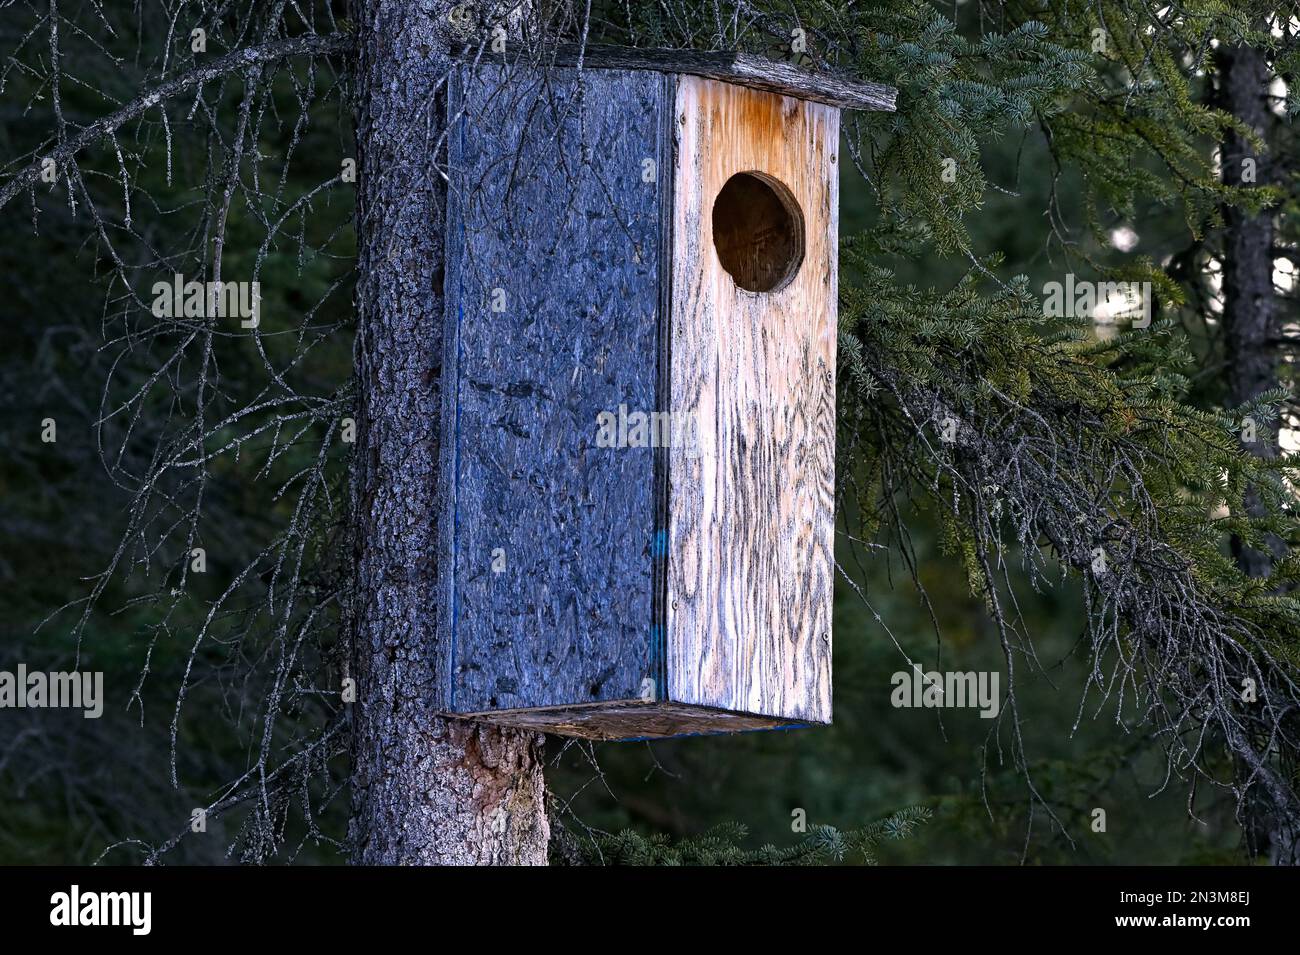 A wooden nest box fastened to a tree to attract ducks to nest in this pond. Stock Photo